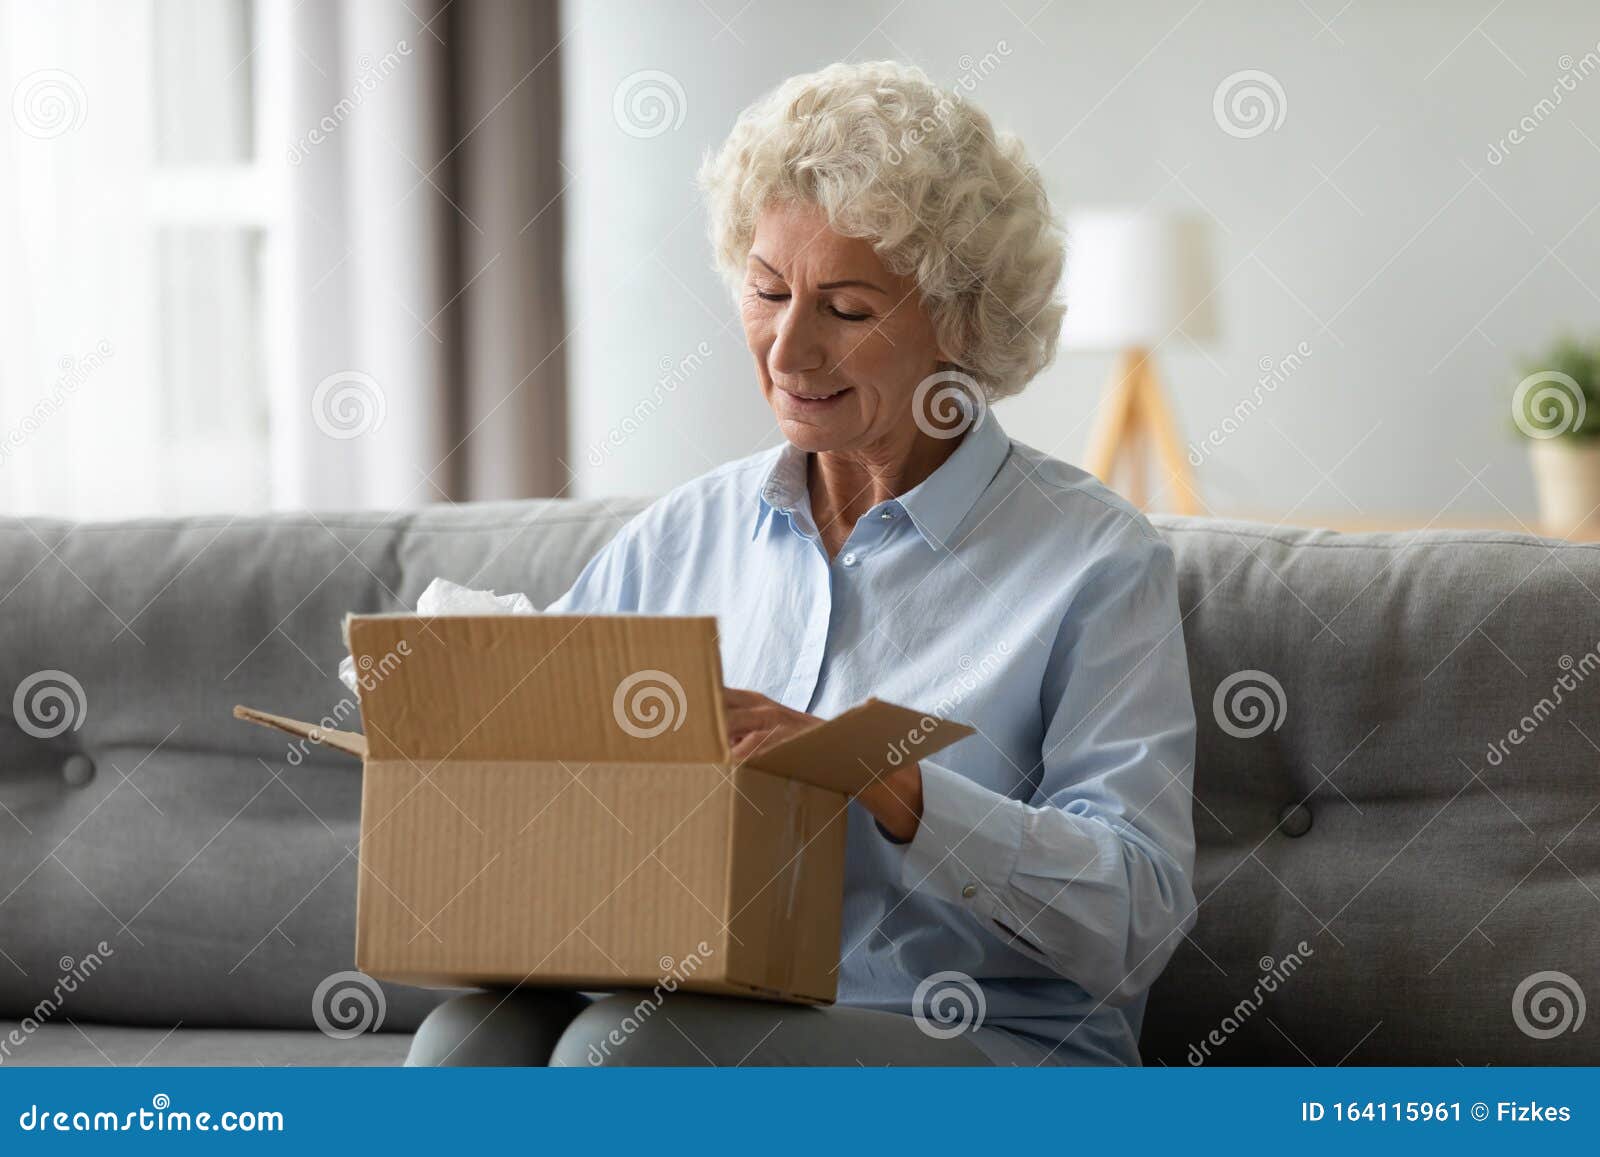 smiling elderly woman customer receive post shipment parcel at home